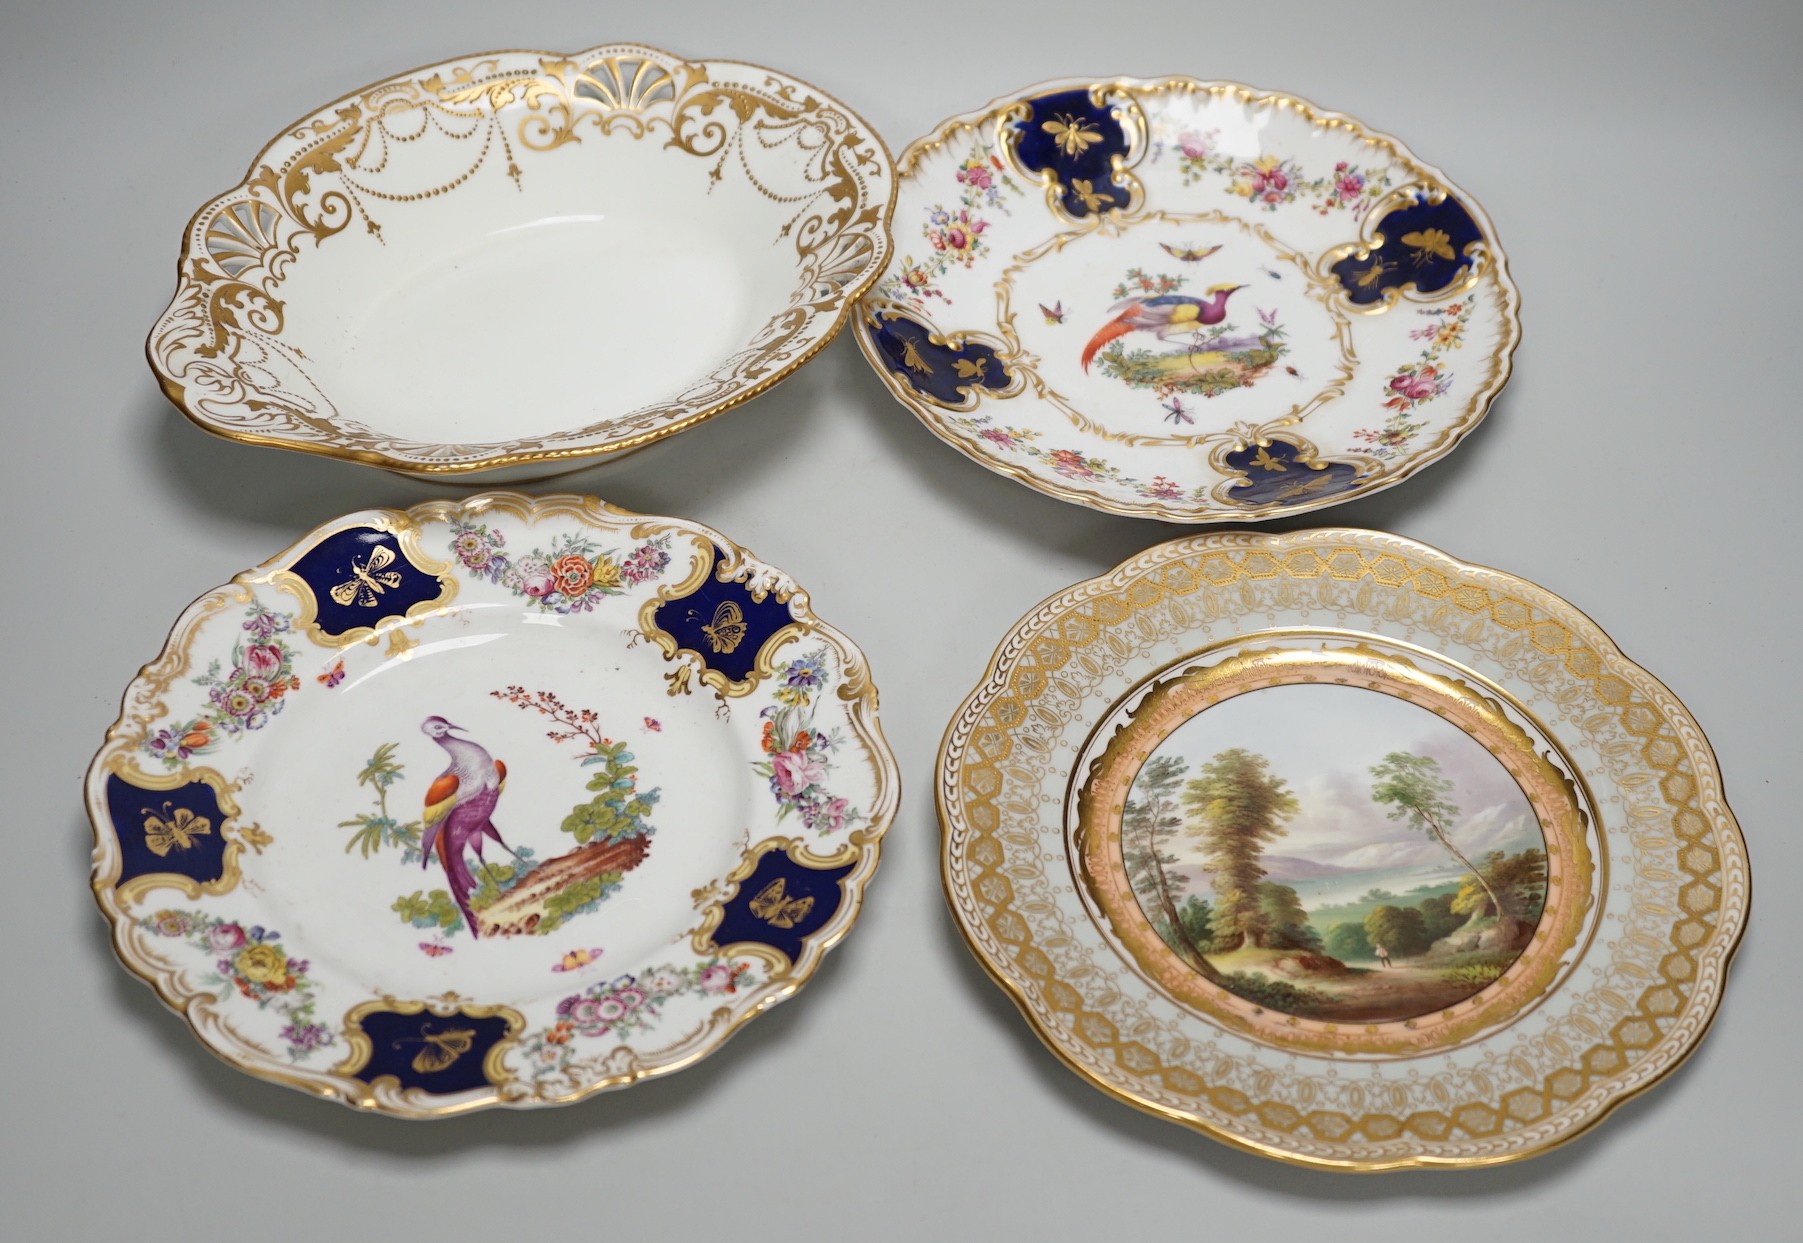 A Copeland plate decorated in Chelsea style with exotic birds on a mazarine blue ground, a similar plate probably Coalport, a Davenport plate with Windemere Lake and a Alderley pierced dish